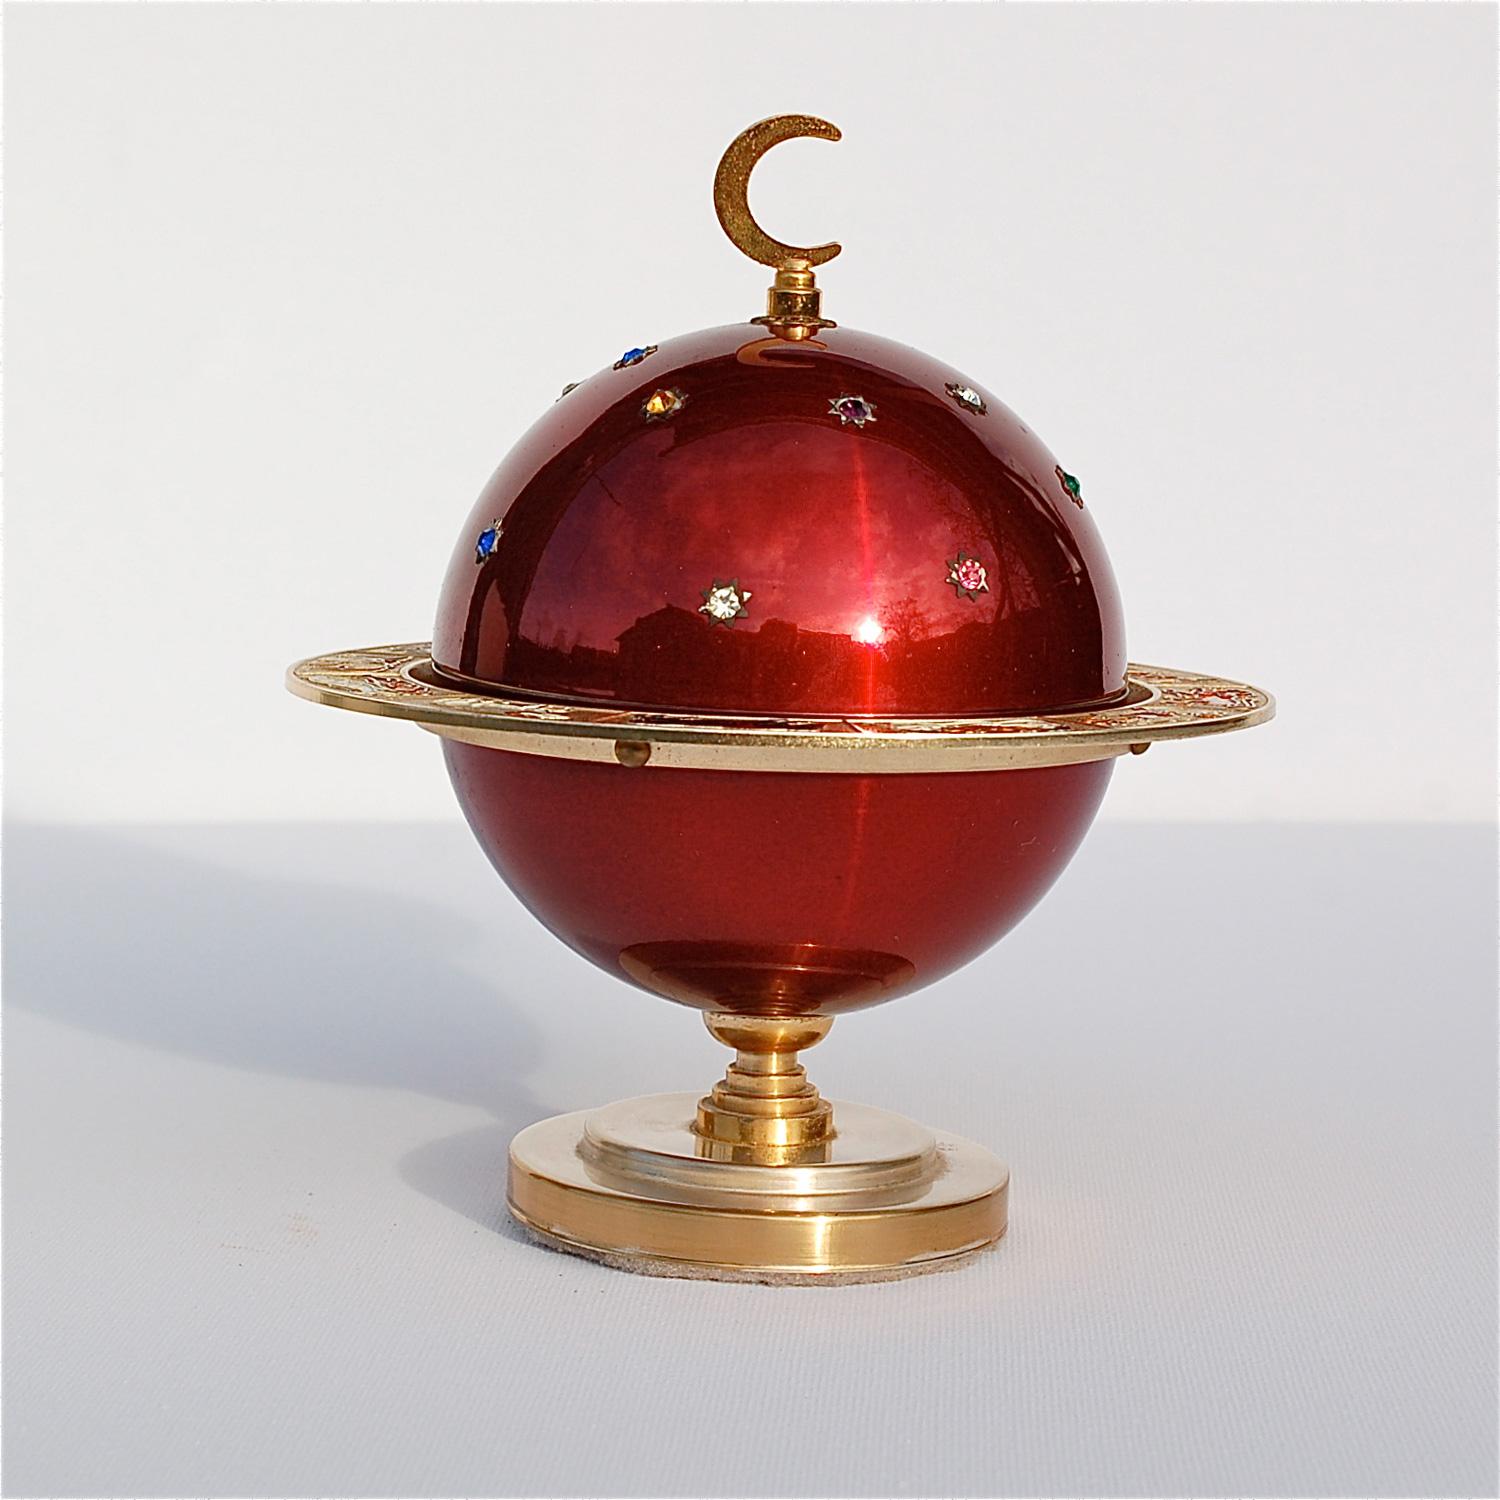 At first sight, you'd never imagine this shiny globe would morph into a cigarette dispenser. By a simple pull, the top hemisphere slides open revealing the inner compartment with room for 18 cigarettes. This novelty vintage cigarette holder in the